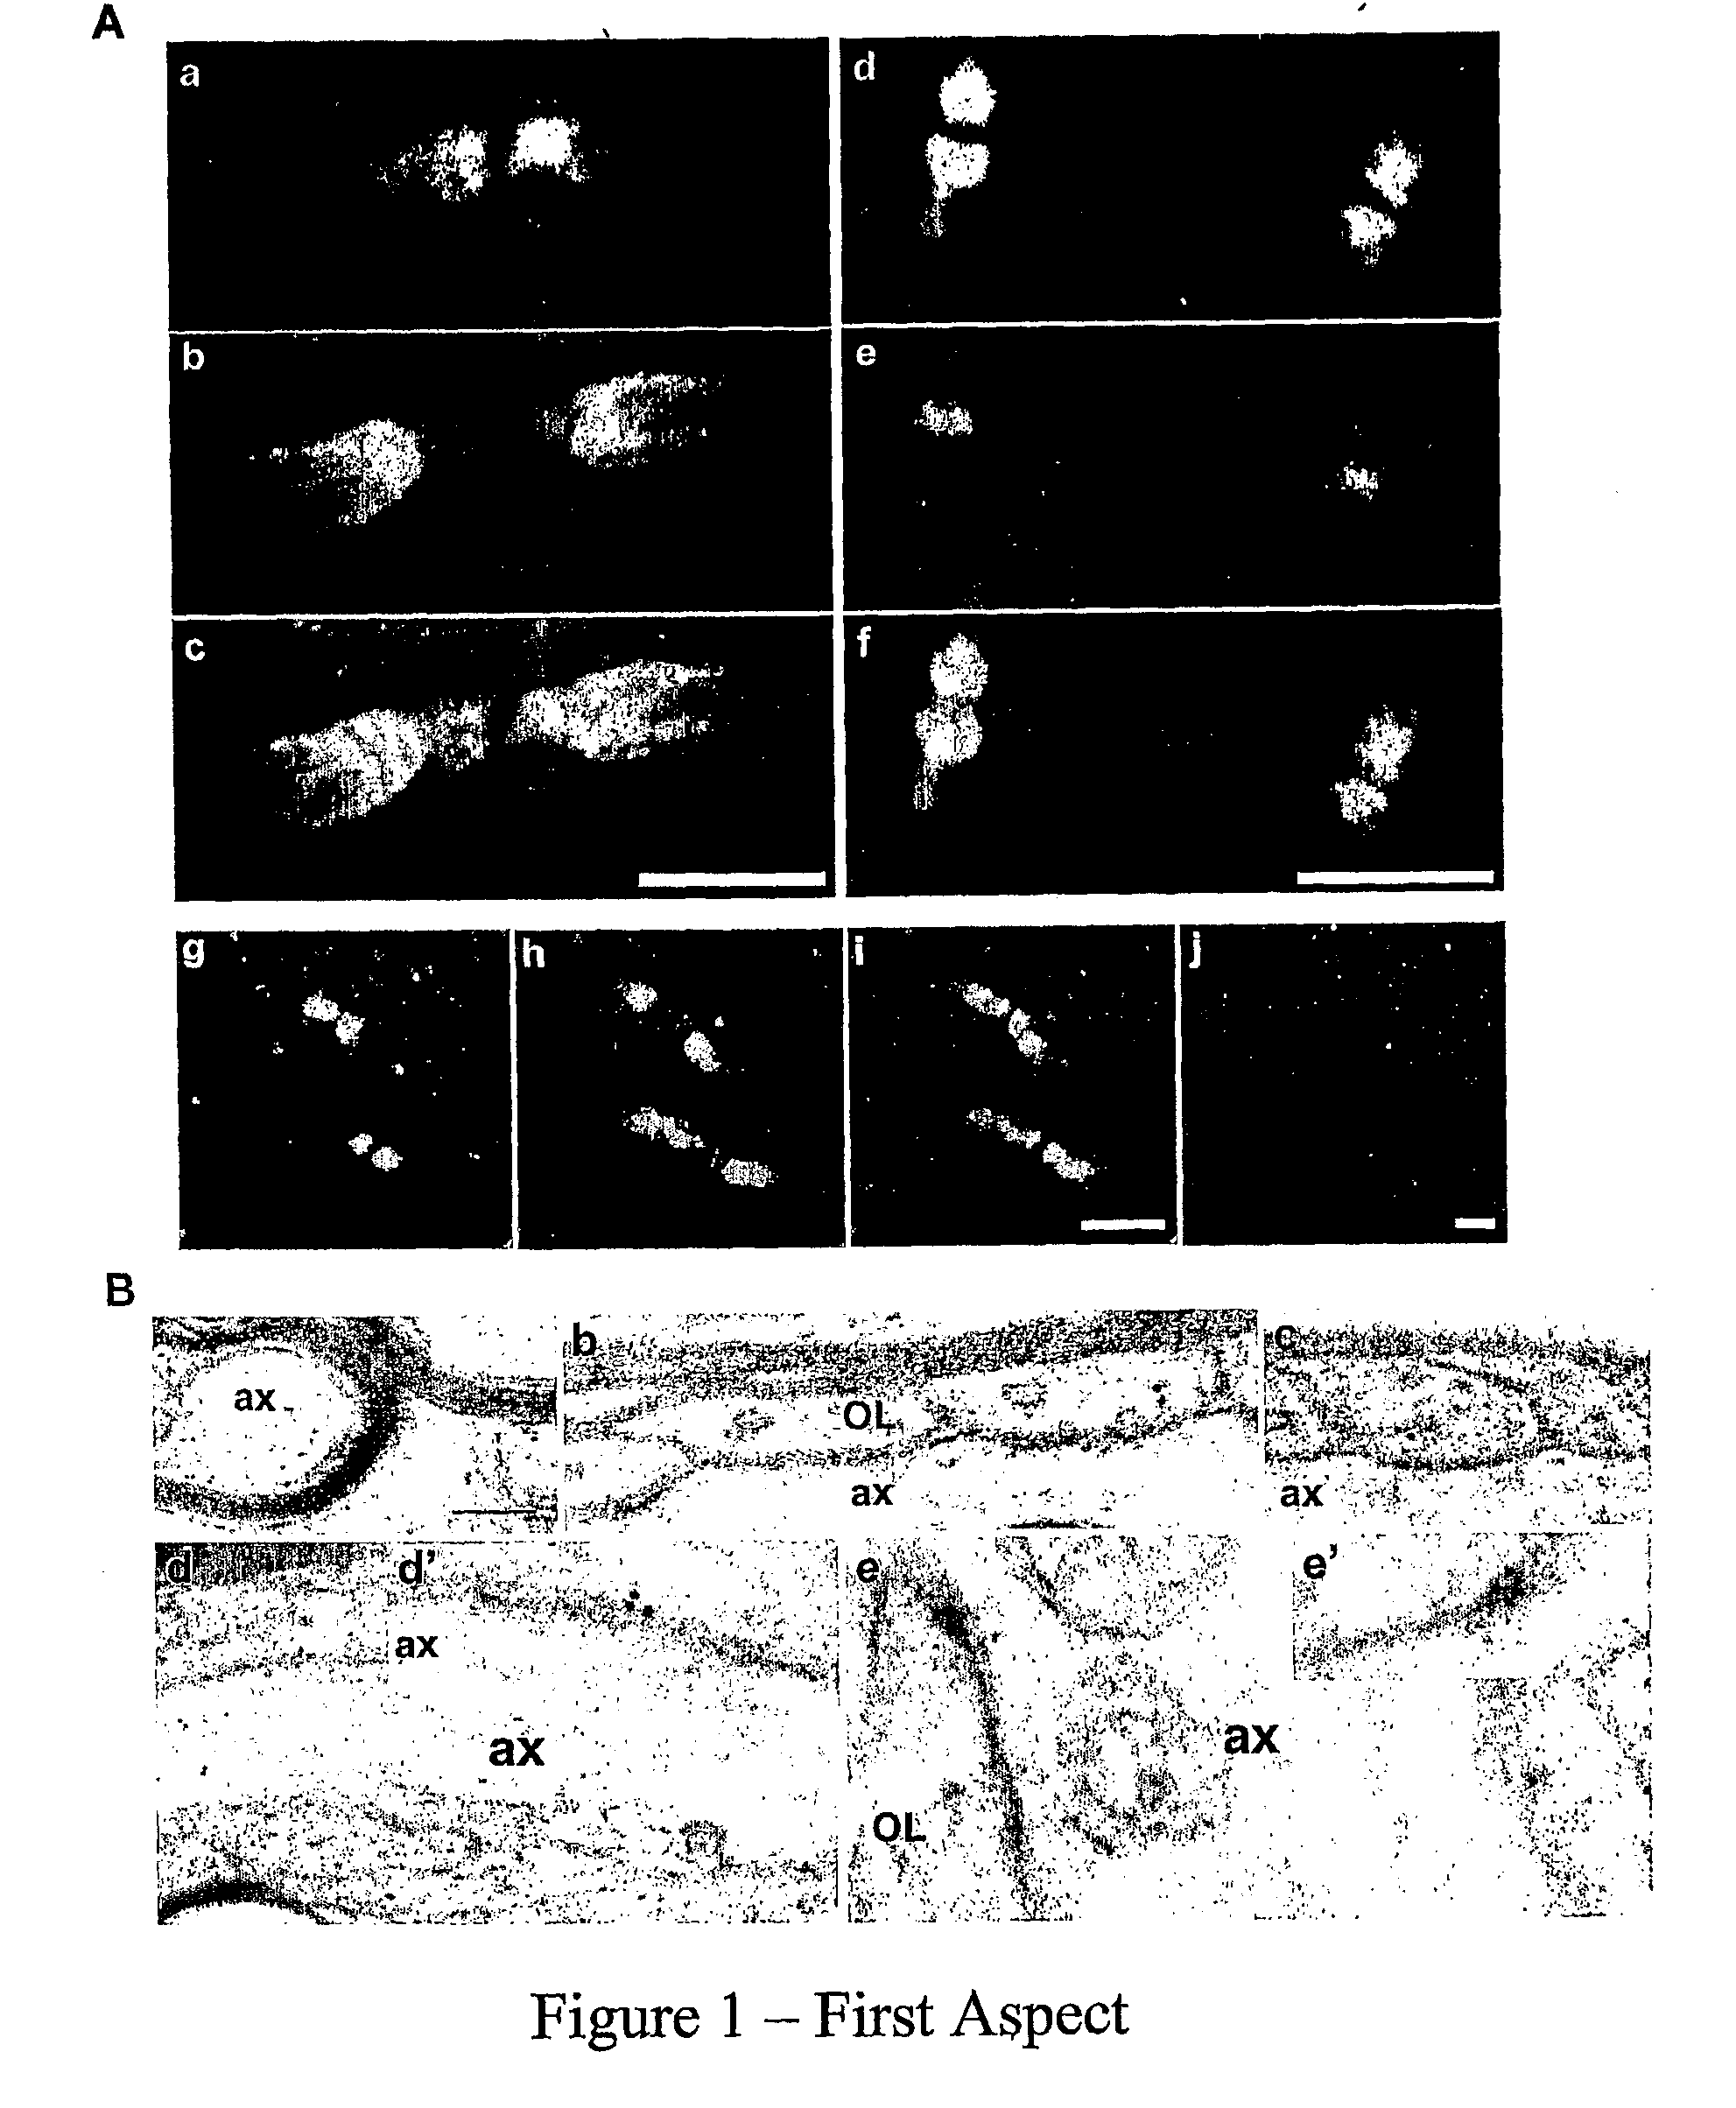 Materials and methods relating to treatment of injury and disease to the central nervous system